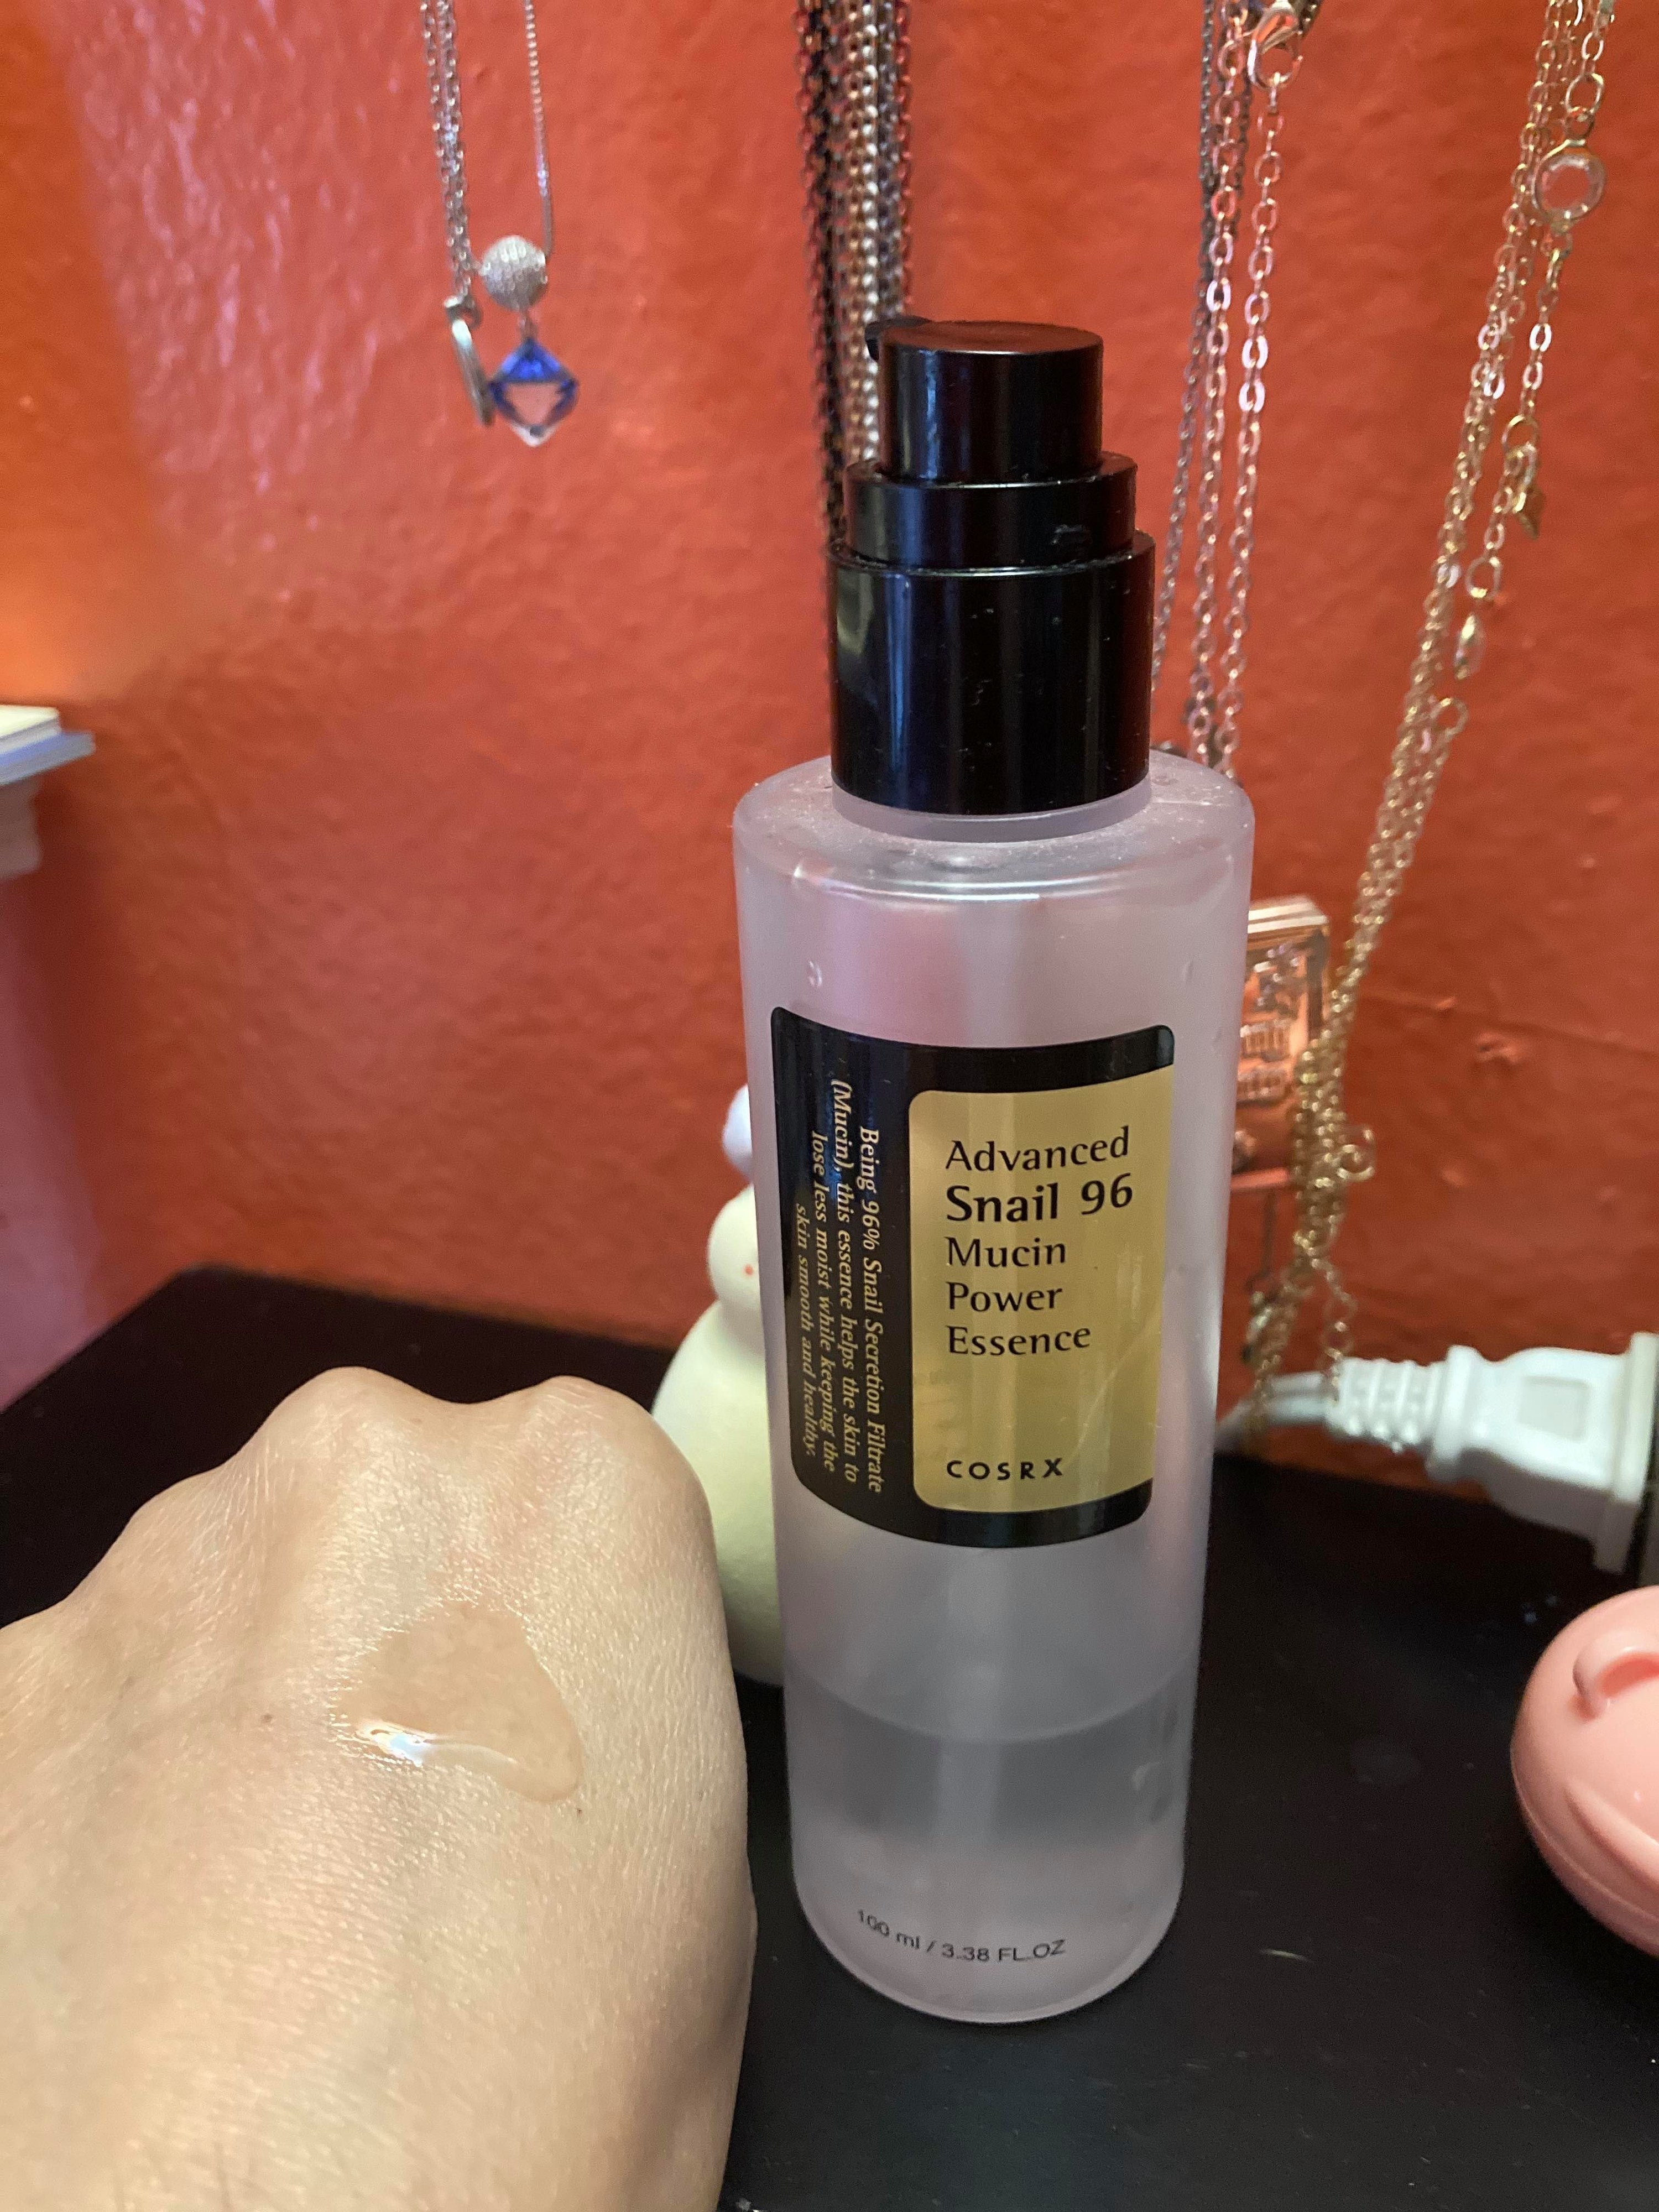 the bottle with swatch of the liquid texture on hand